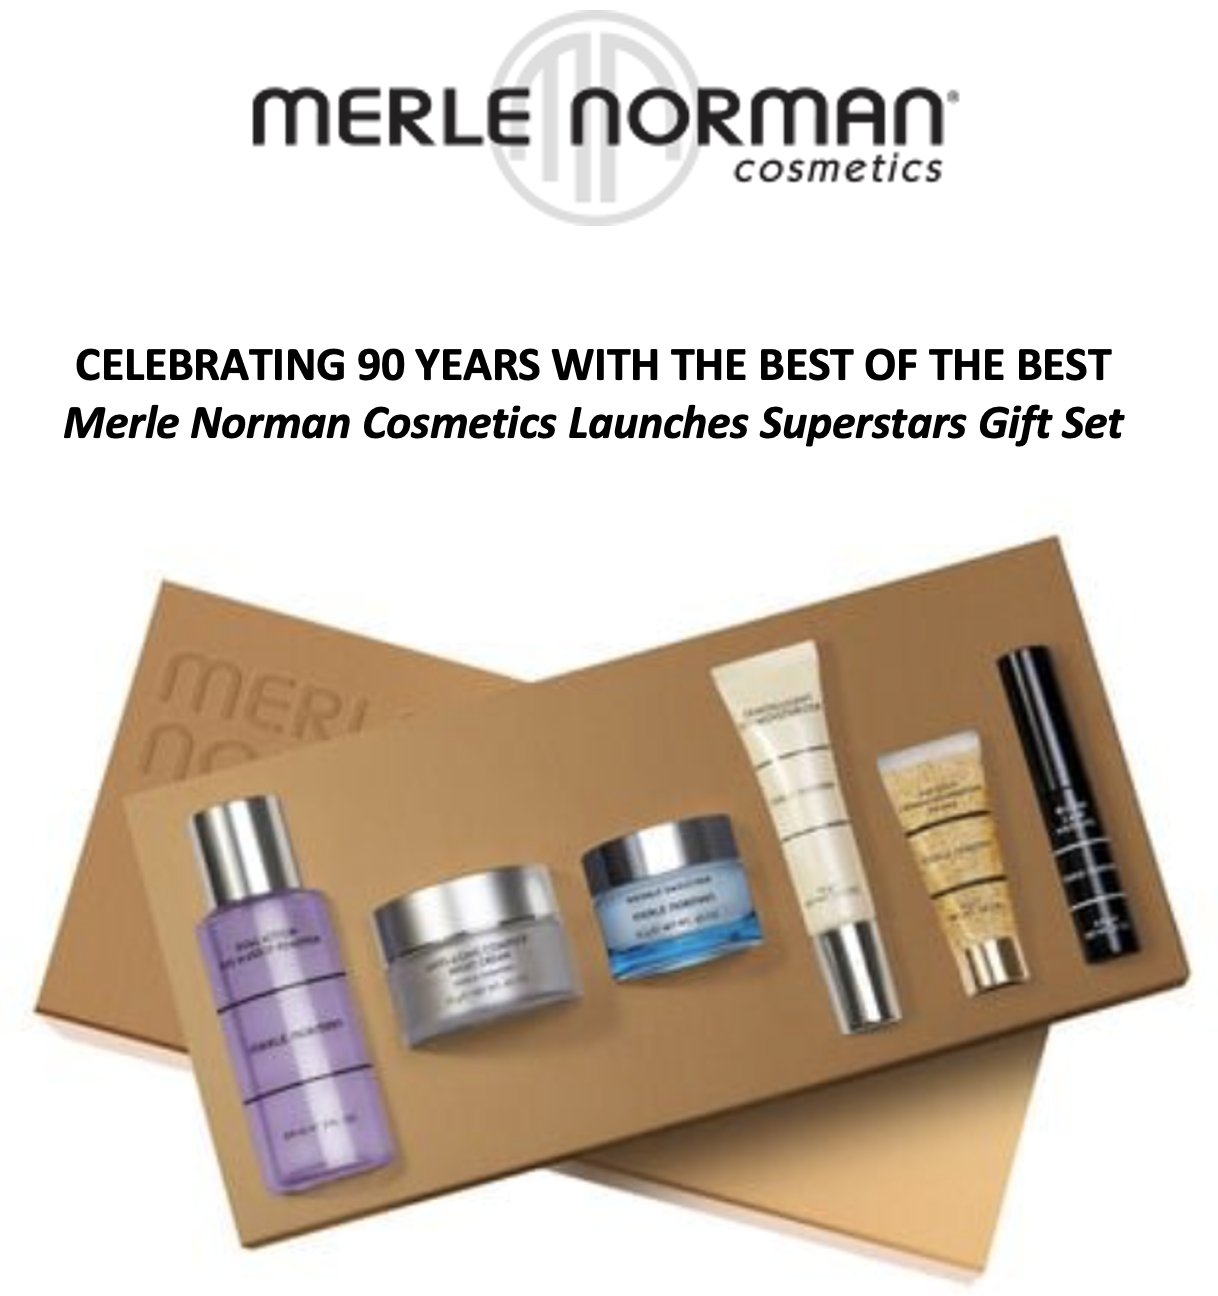 Merle Norman Cosmetics Marks 90-year Anniversary with Superstars Gift Set Release 